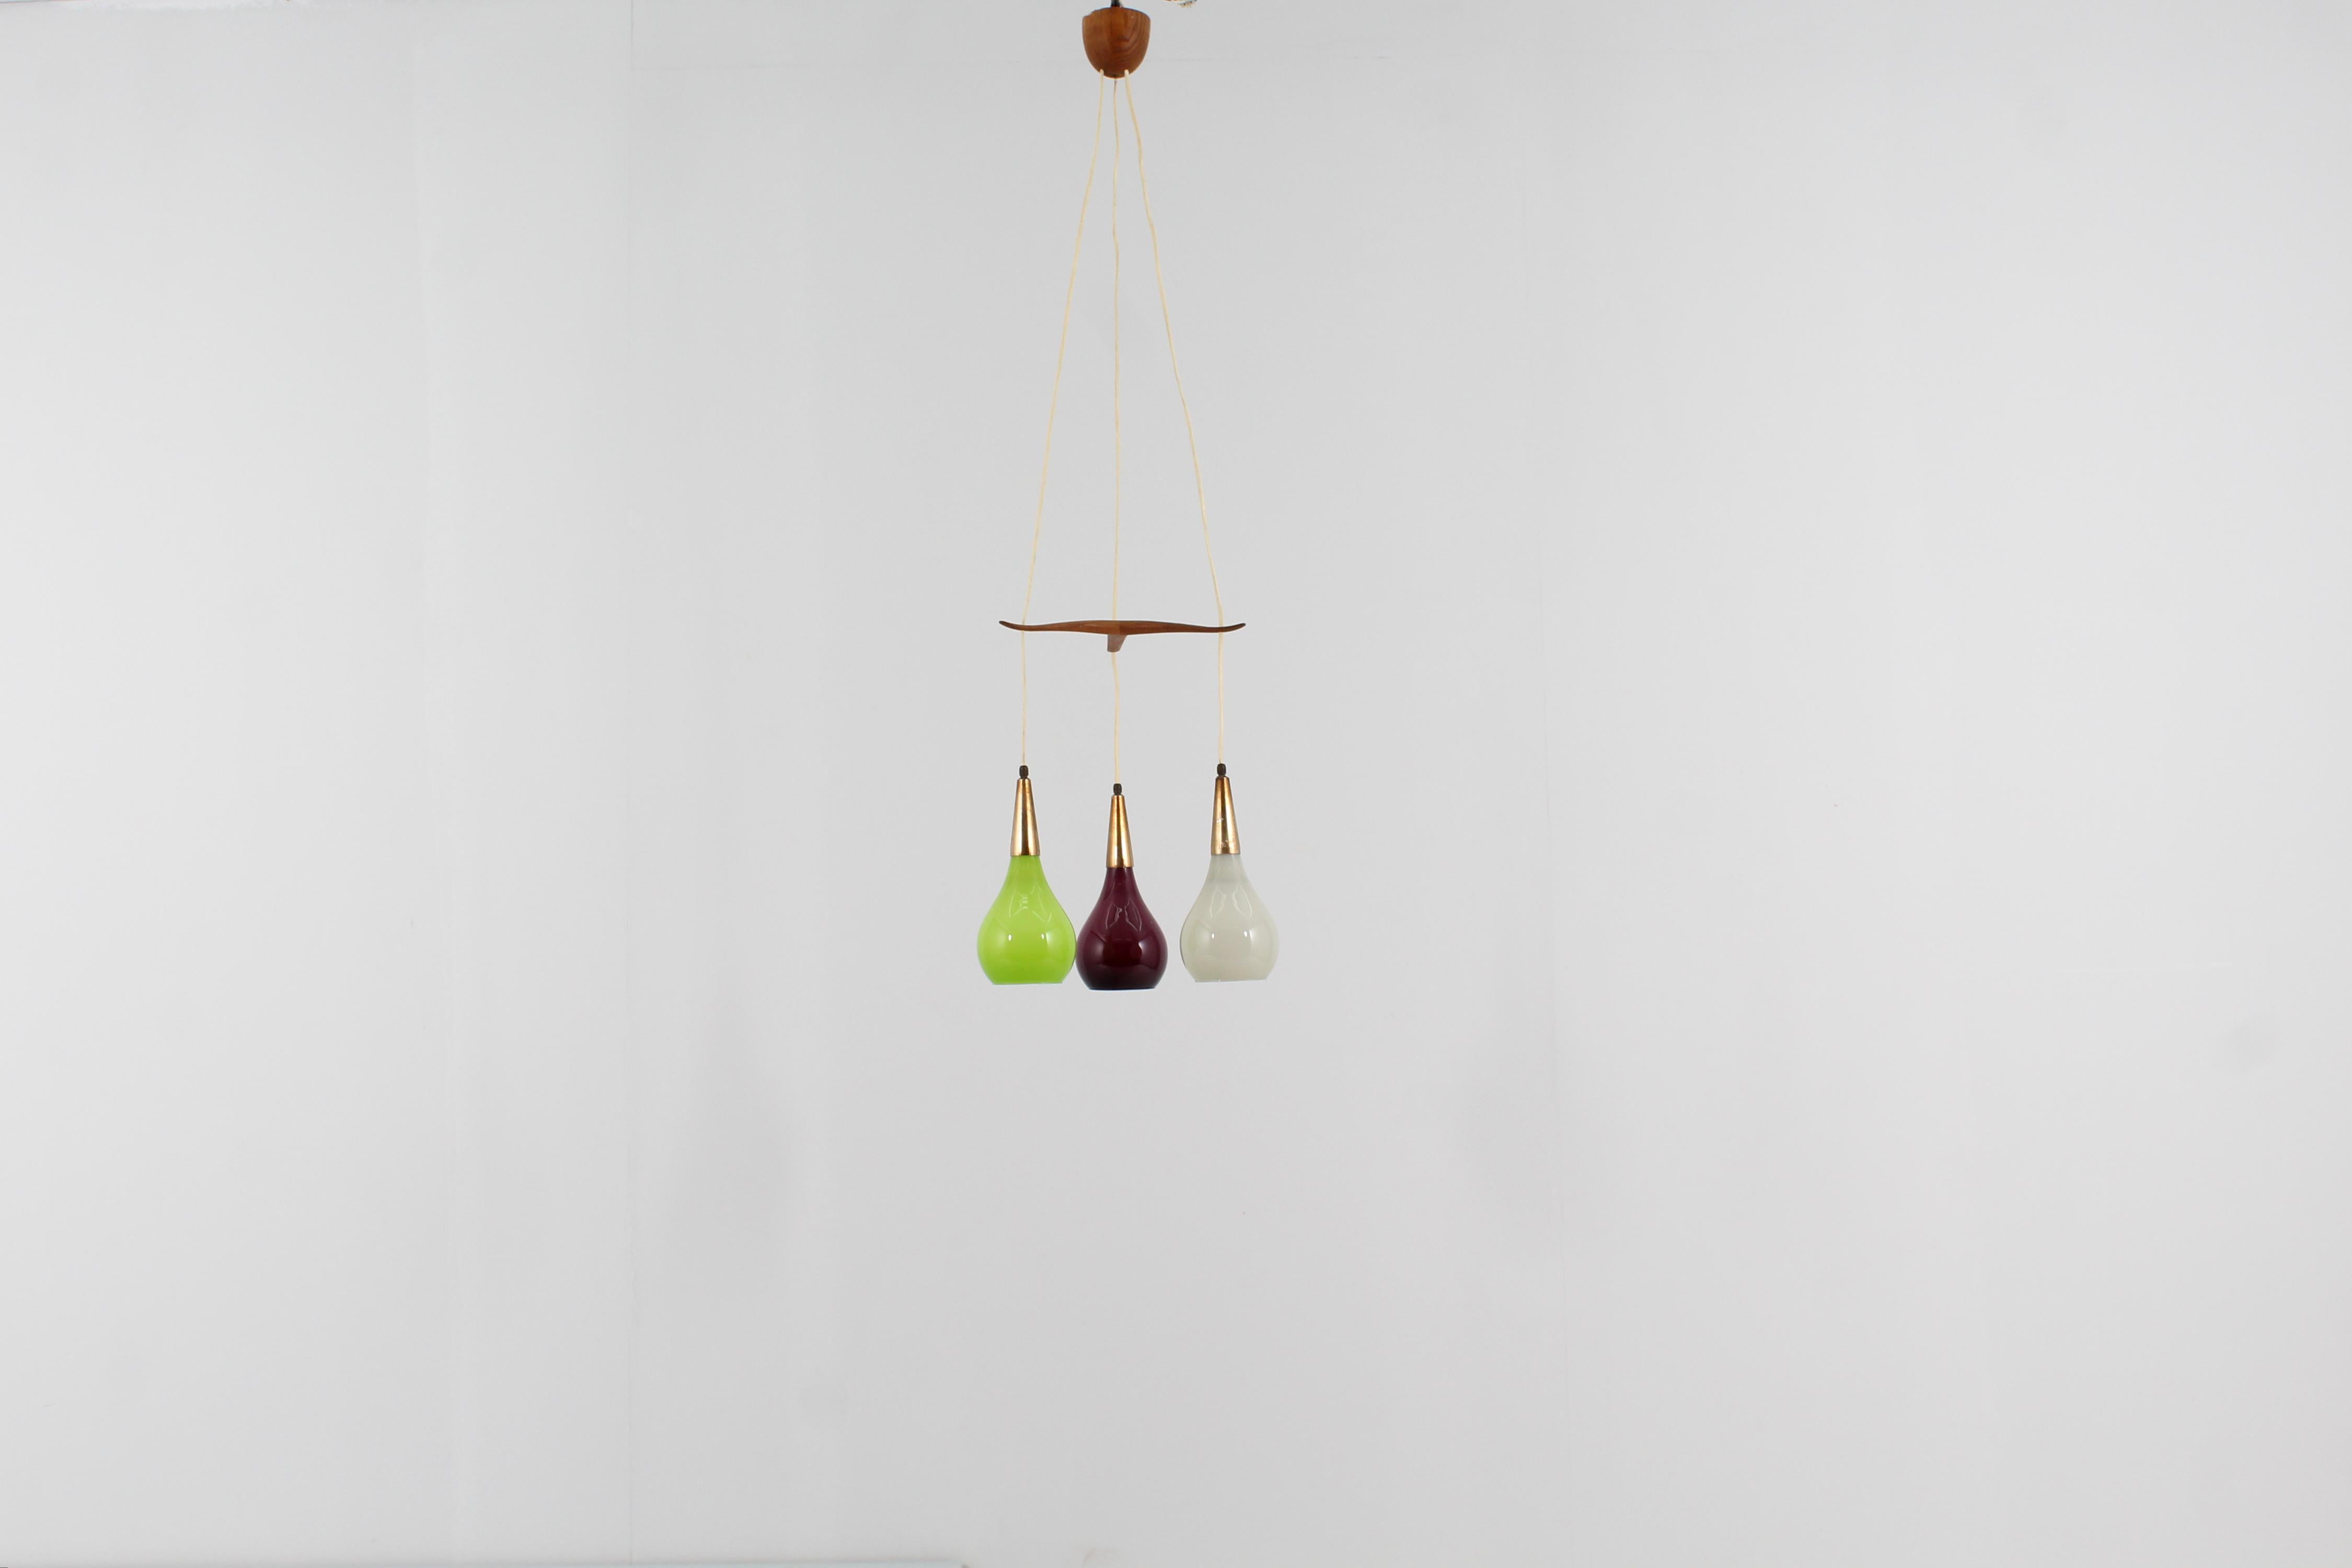 Elegant pendant lamp with three lights with wires spaced by a three-pointed element in bevelled wood and drop-shaped diffusers in green, plum and white colored glass, with brass elements. Luxus Vittsjo production label on the wood, Sweden